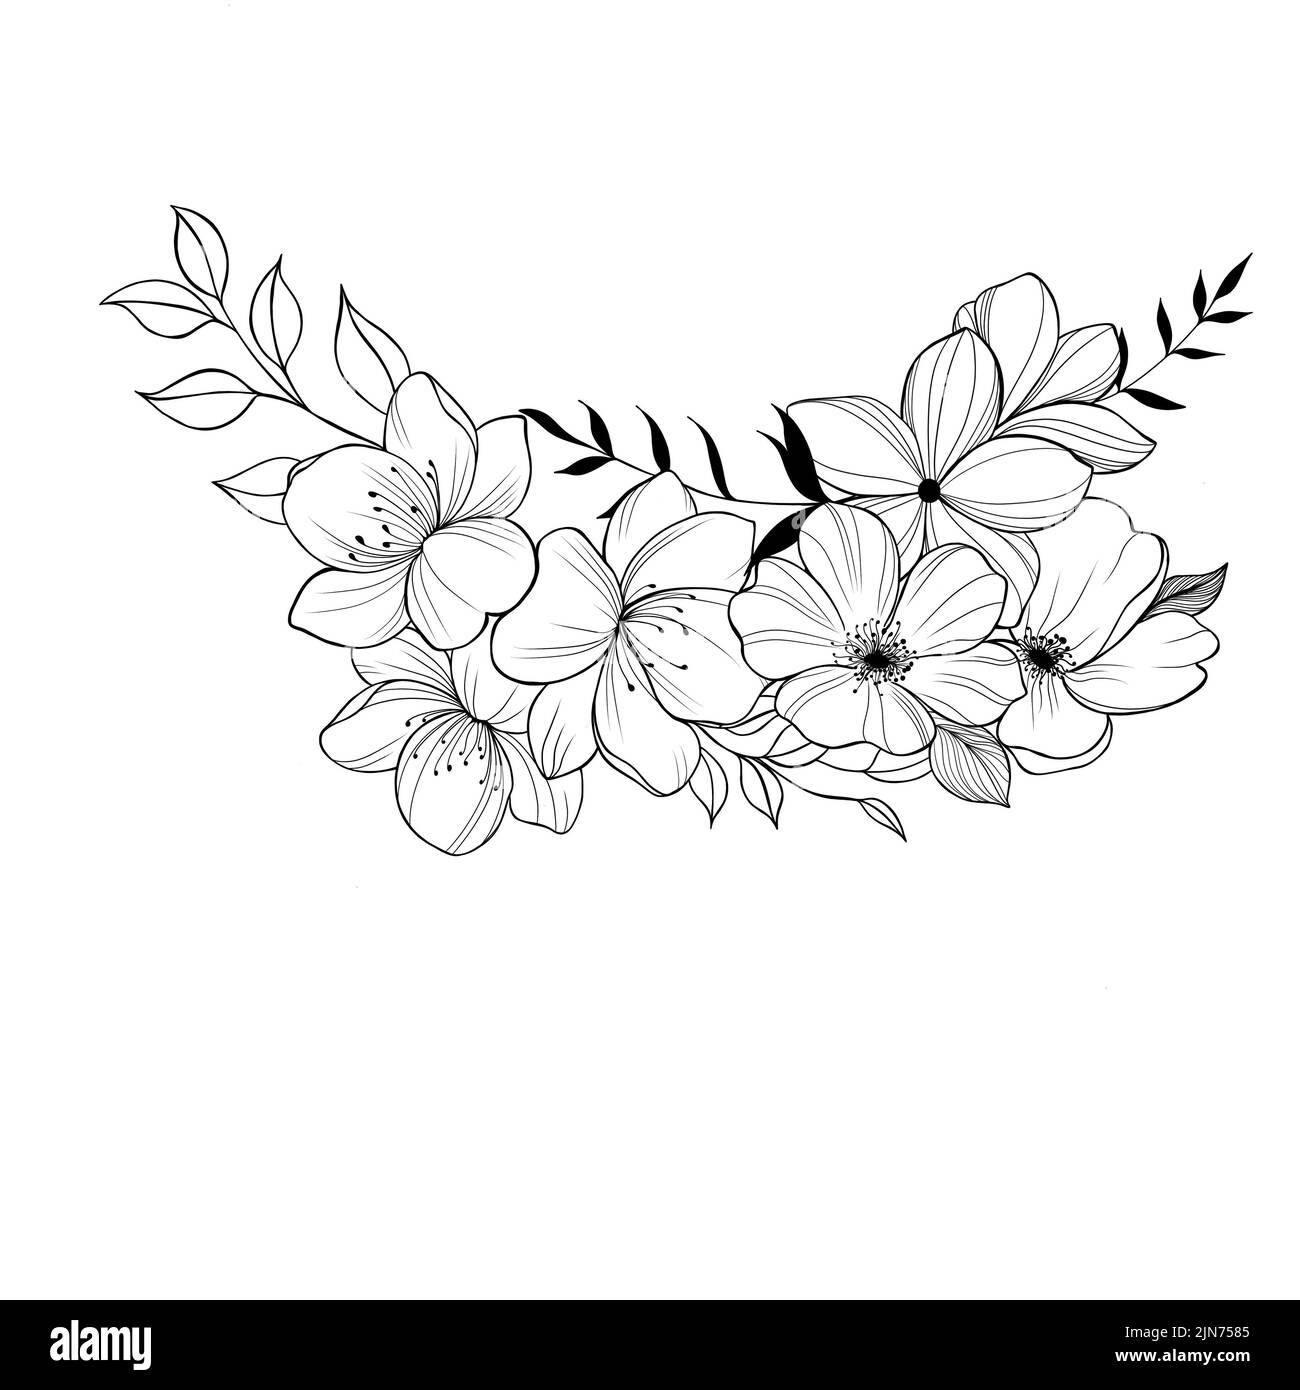 Flowers Periwinkle. Hand drawing. Outline. On a white background. Beautiful sketch of a tattoo - a delicate twig with flowers. botany design element Stock Photo